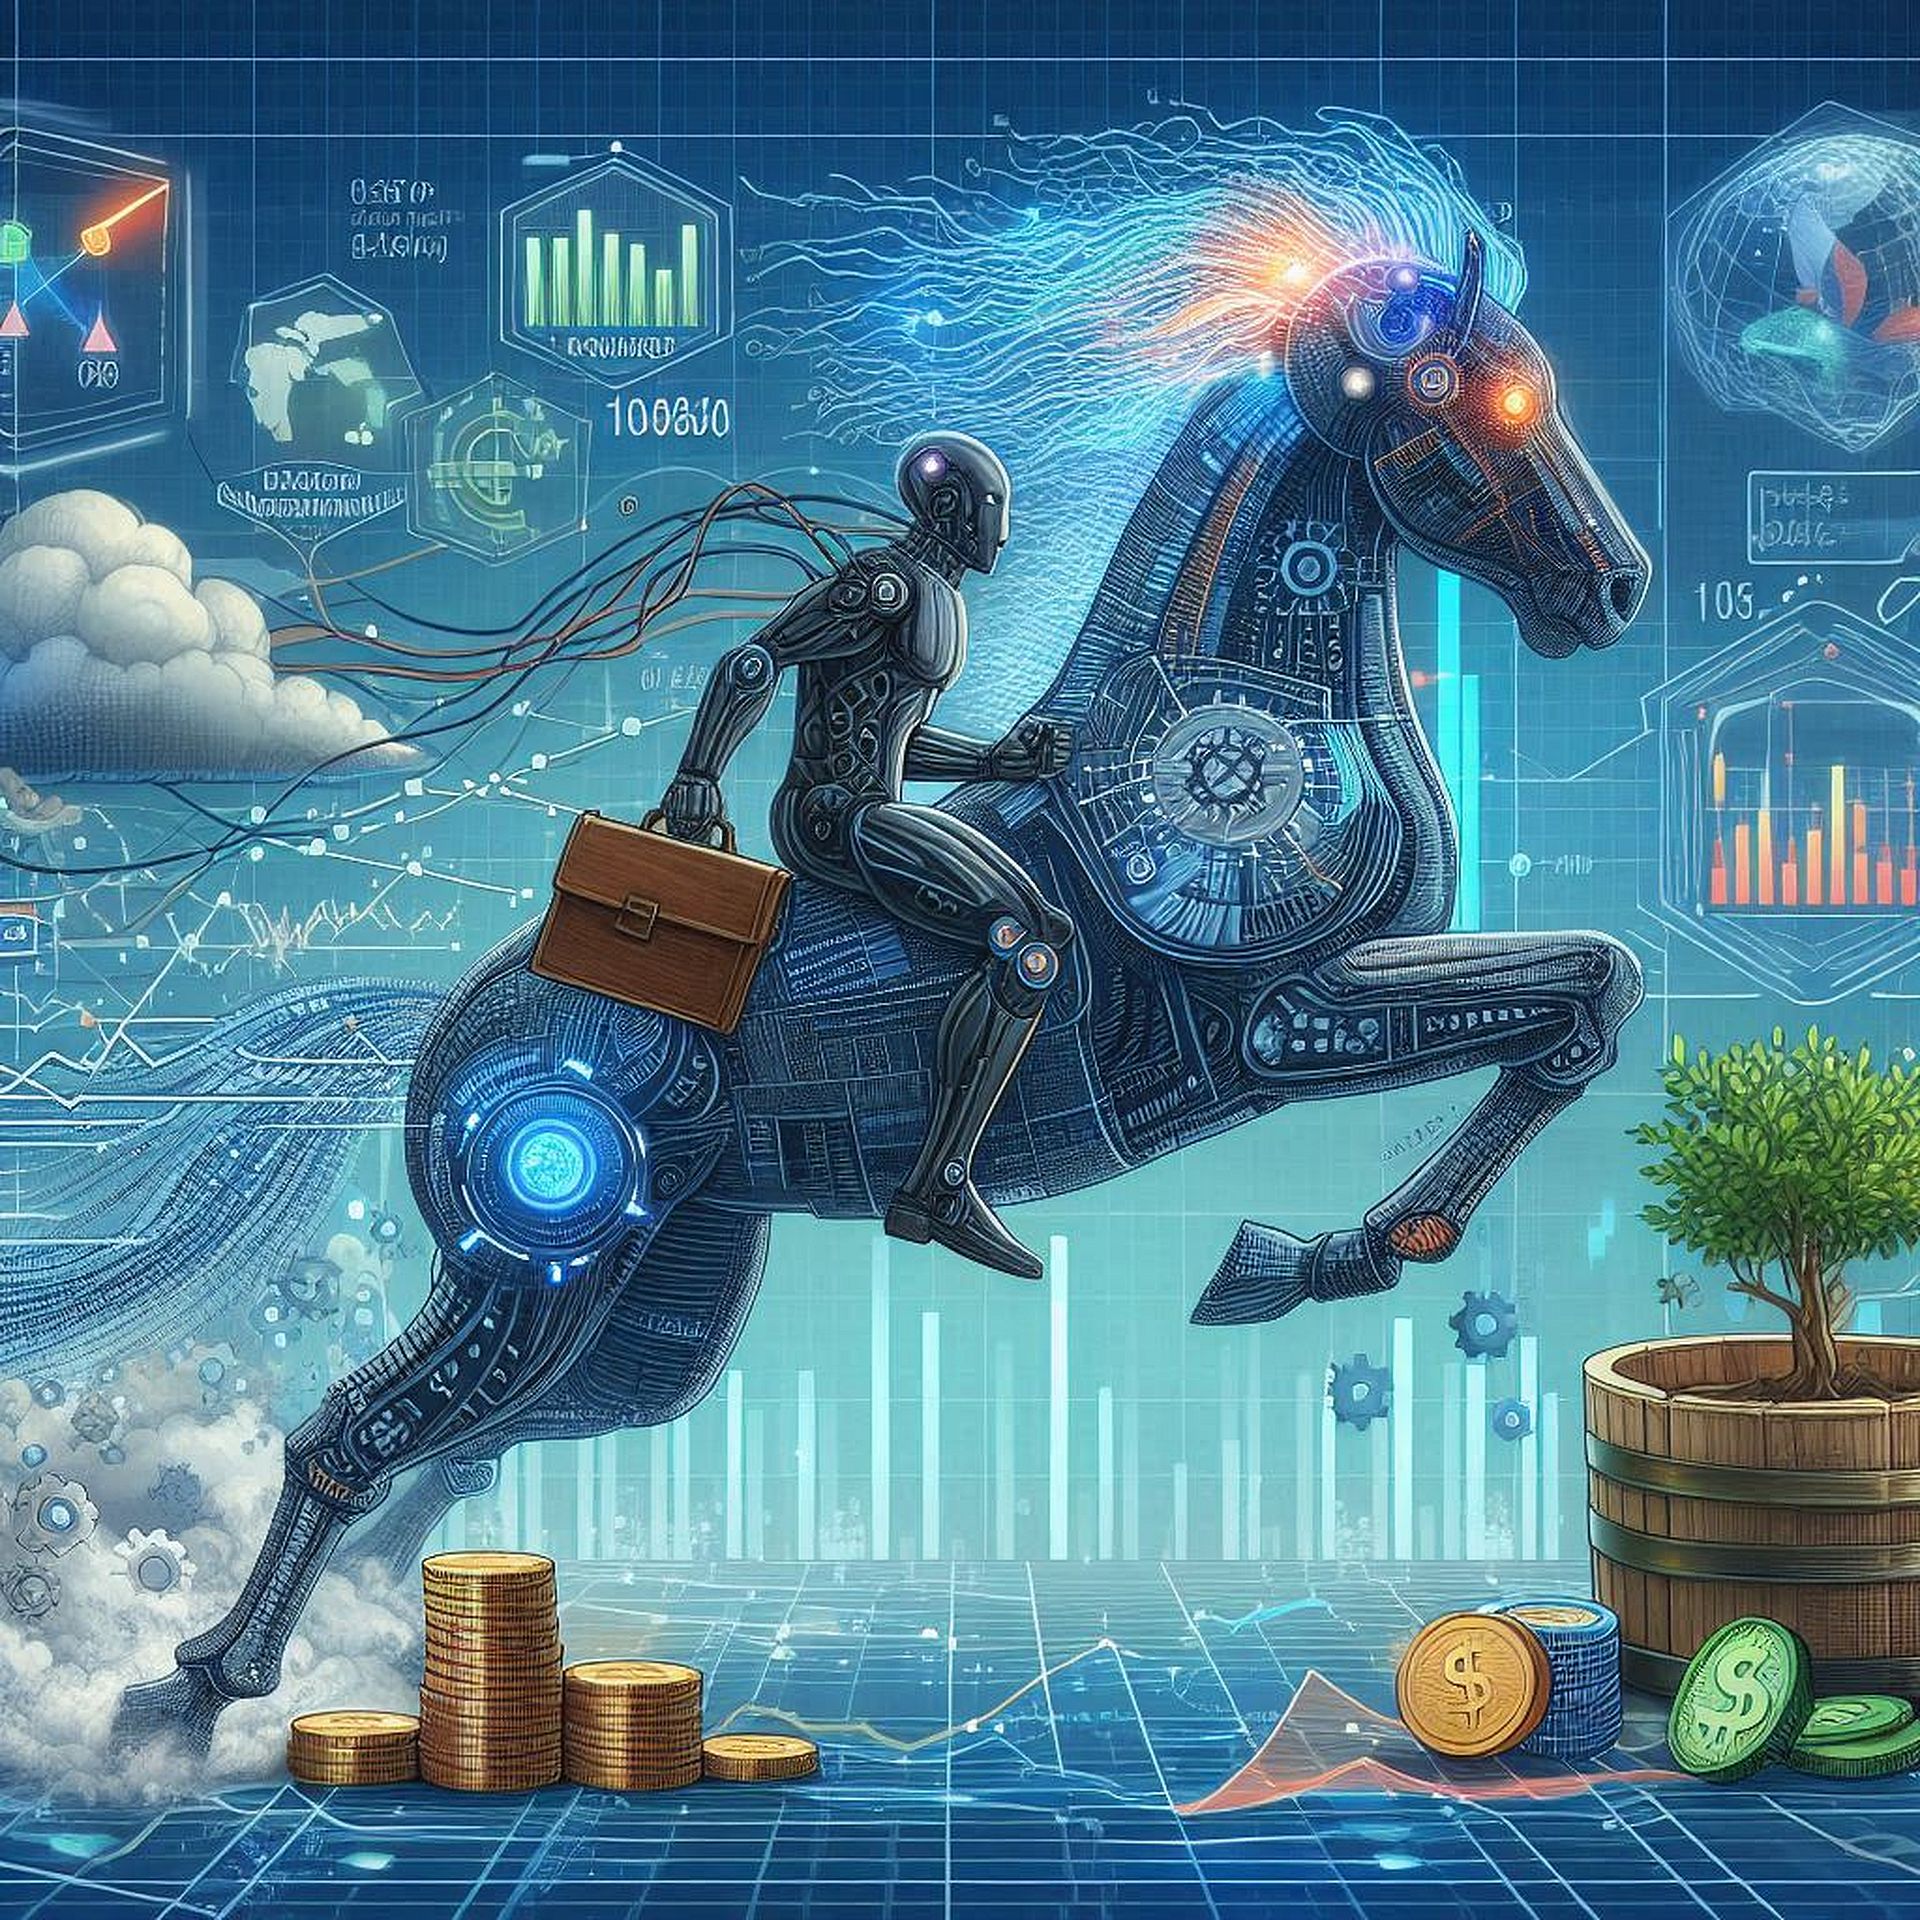 In-depth analysis: Traders Union explors AI investment with ChatGPT stocks